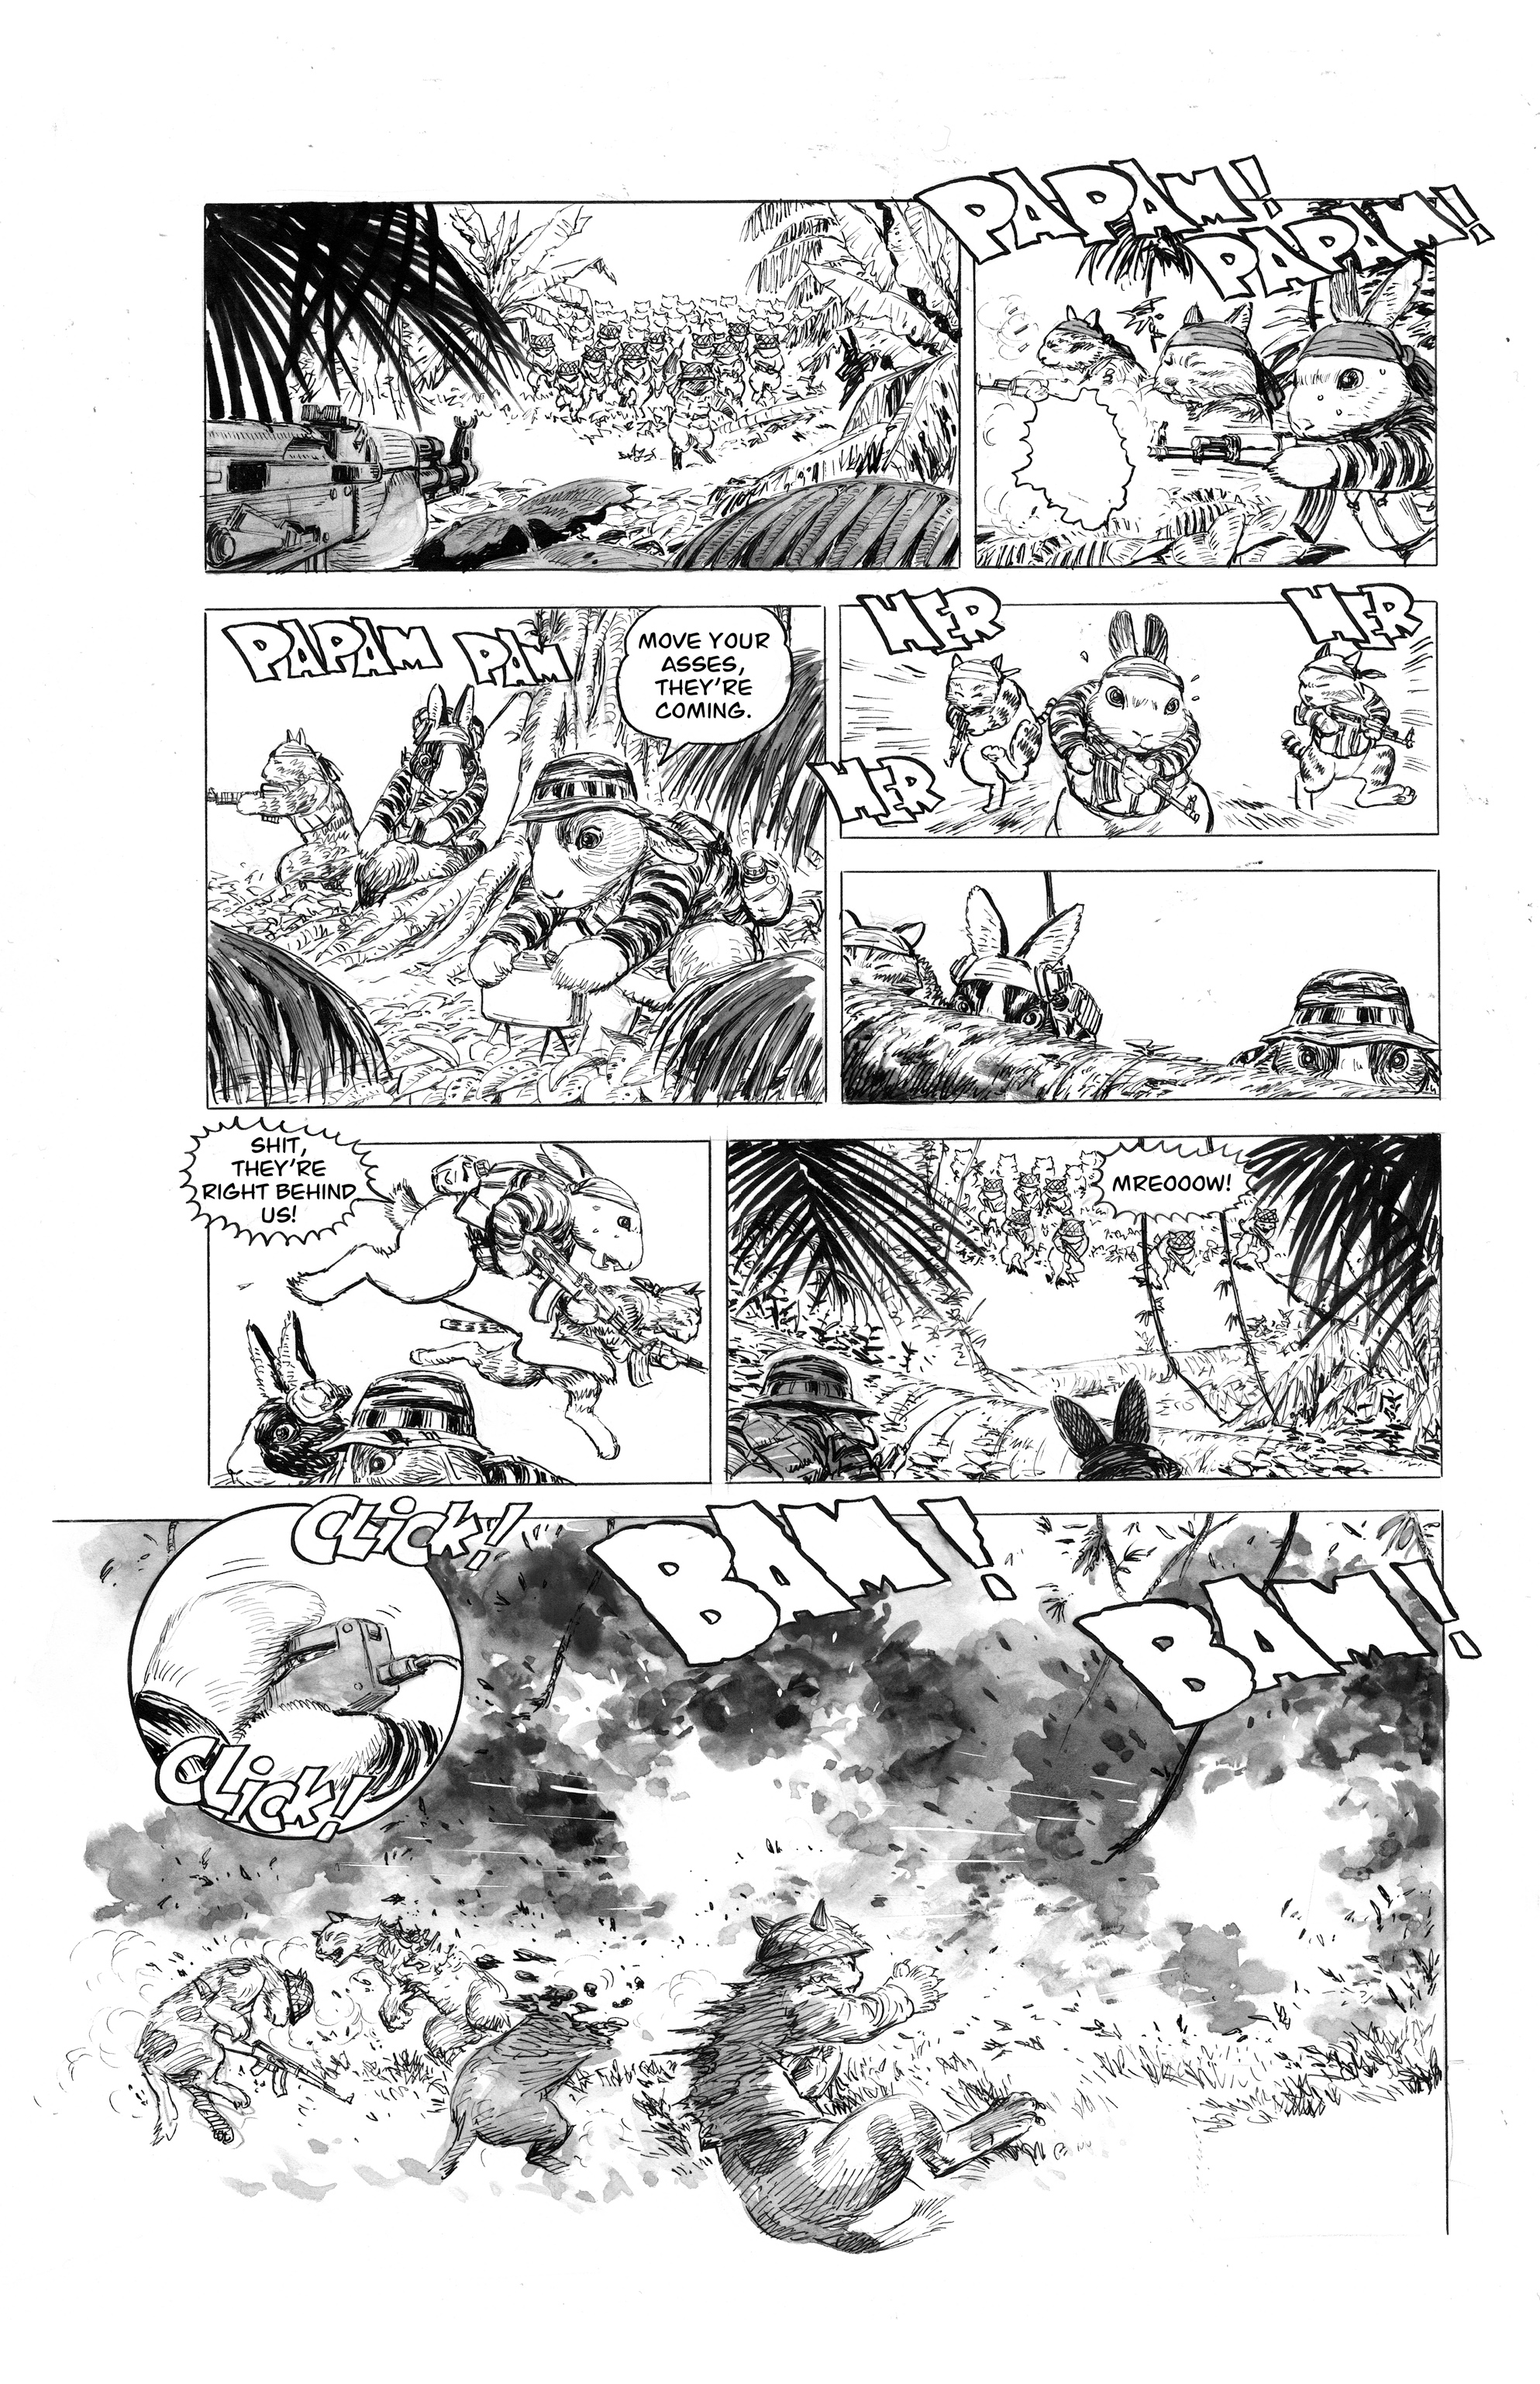 Cat Shit One Vol. 1 (2020-): Chapter 1 - Page 5